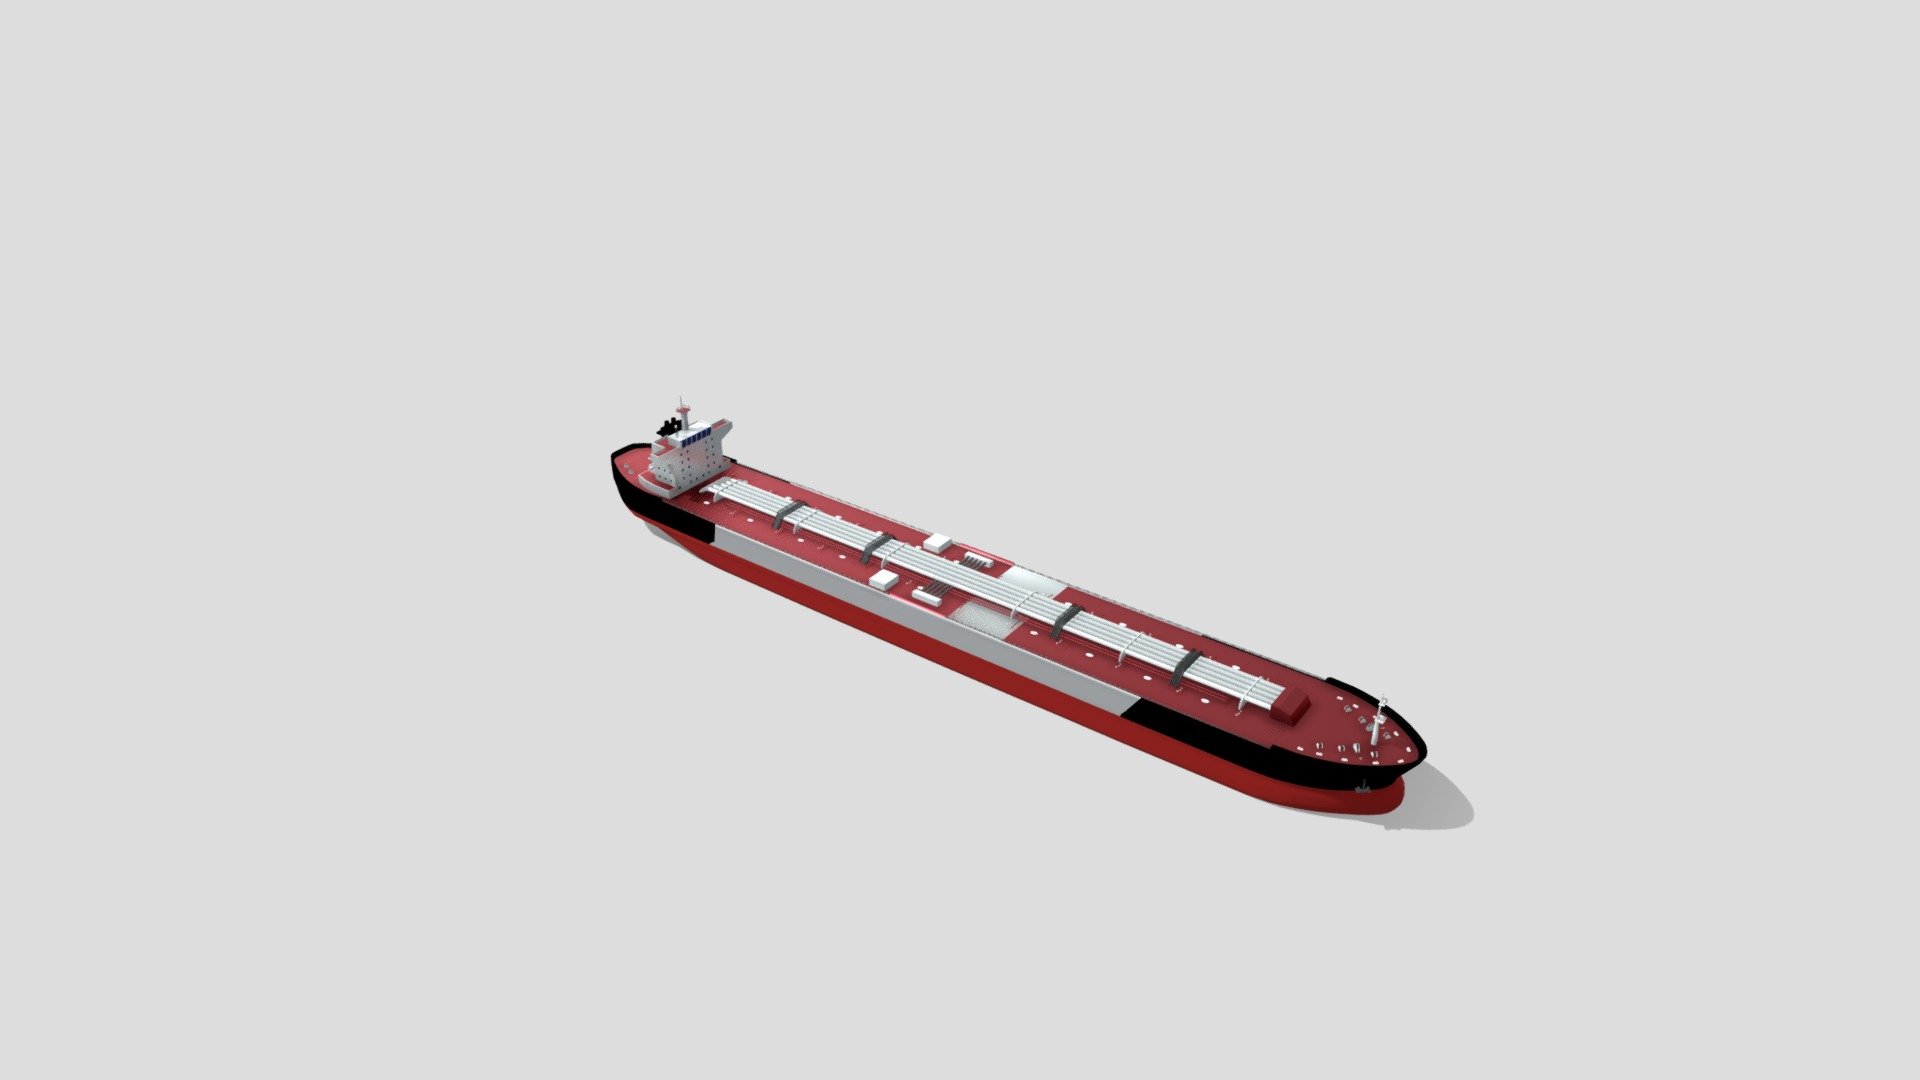 Ship: Tanker
Class: Suez-Max
Full length: 322 m
Full width: 47 m

I finally built the tanker after weeks of experience. It's the second series of civilian ships after LNG carriers. I think it took at least several times more time than the previous LNG carrier.

Compared to the previous one, the quality went up even more because it added various textures. In addition, we have created a virtual shipping company for this &ldquo;private ship series,